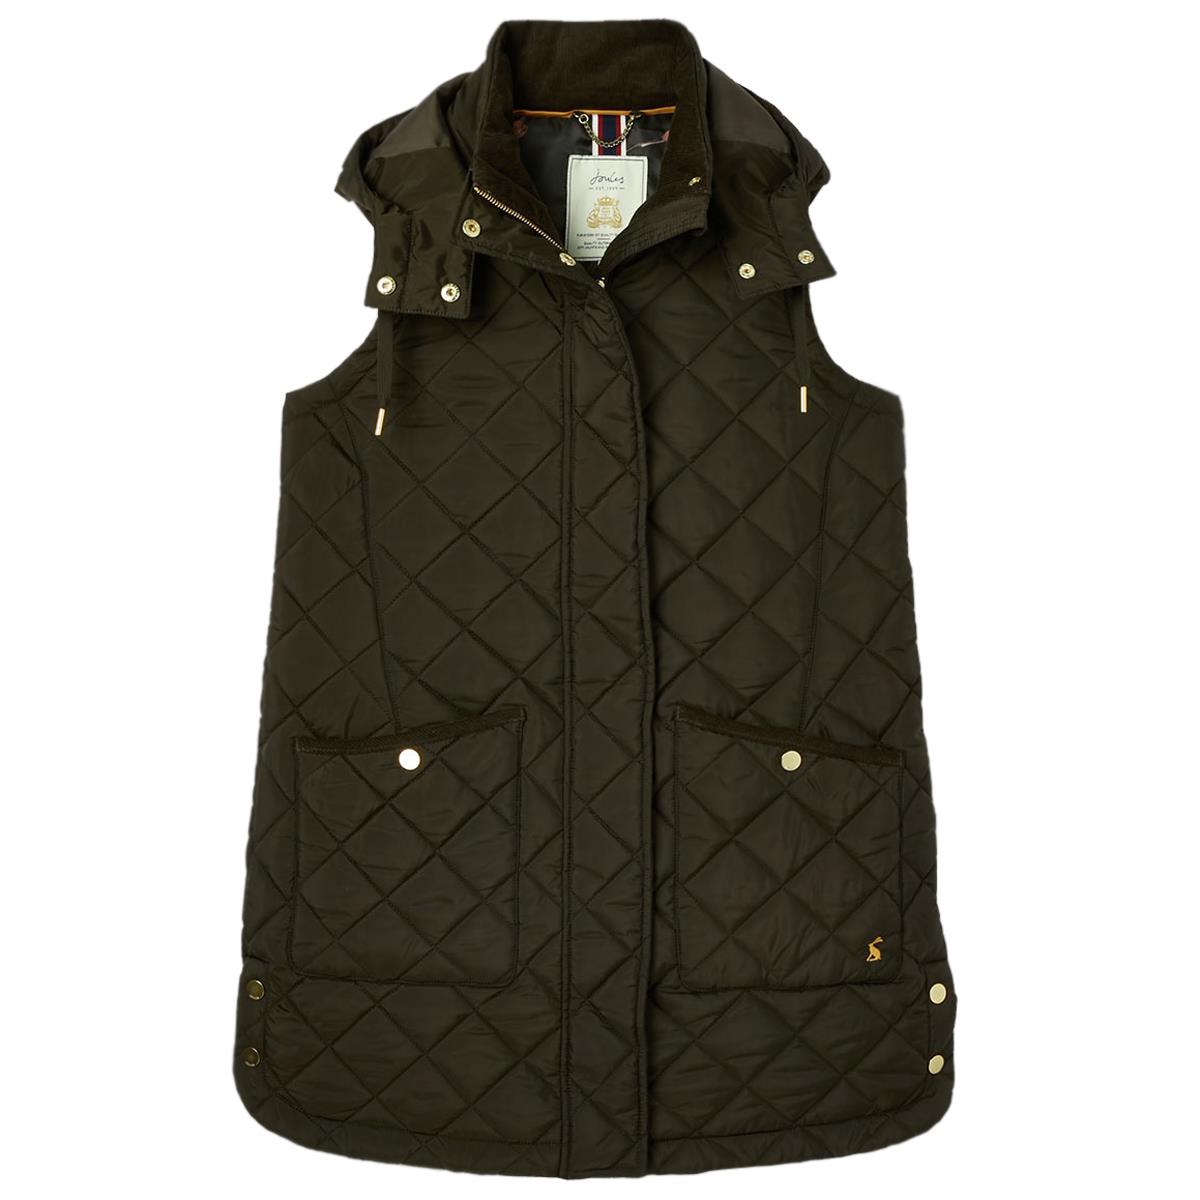 What is the length of the Joules Chatham Gilet?